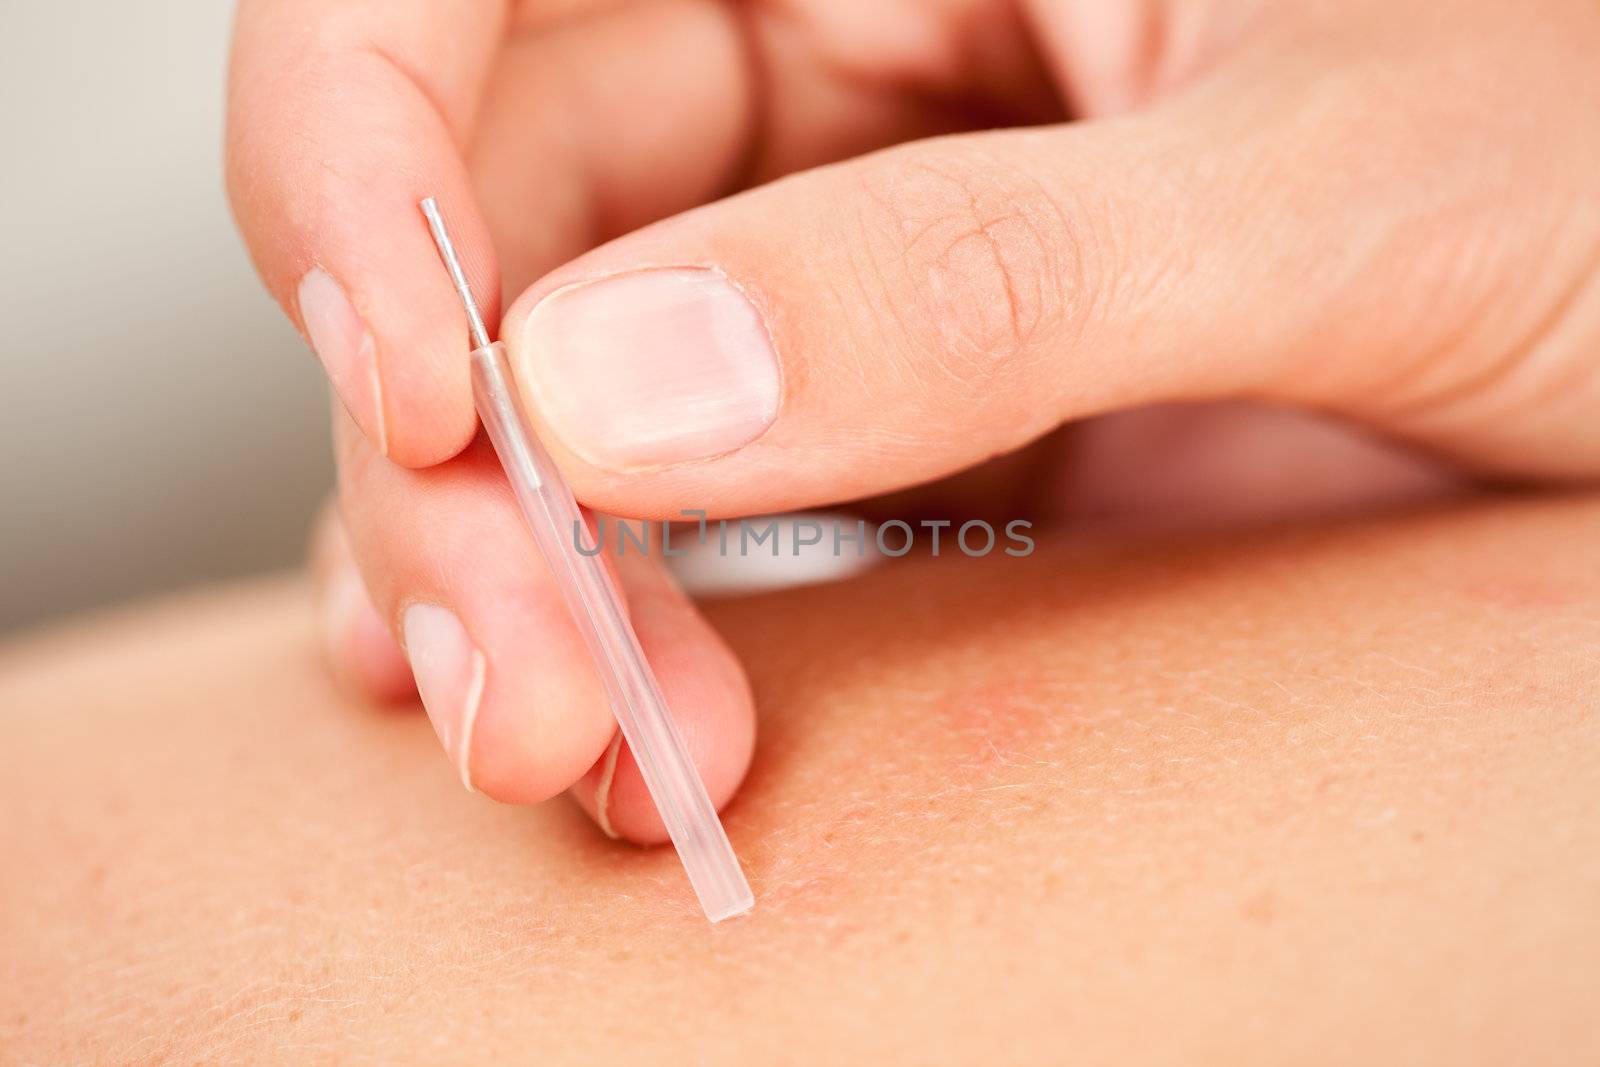 Acupuncture Needle with Insertion Tube by leaf